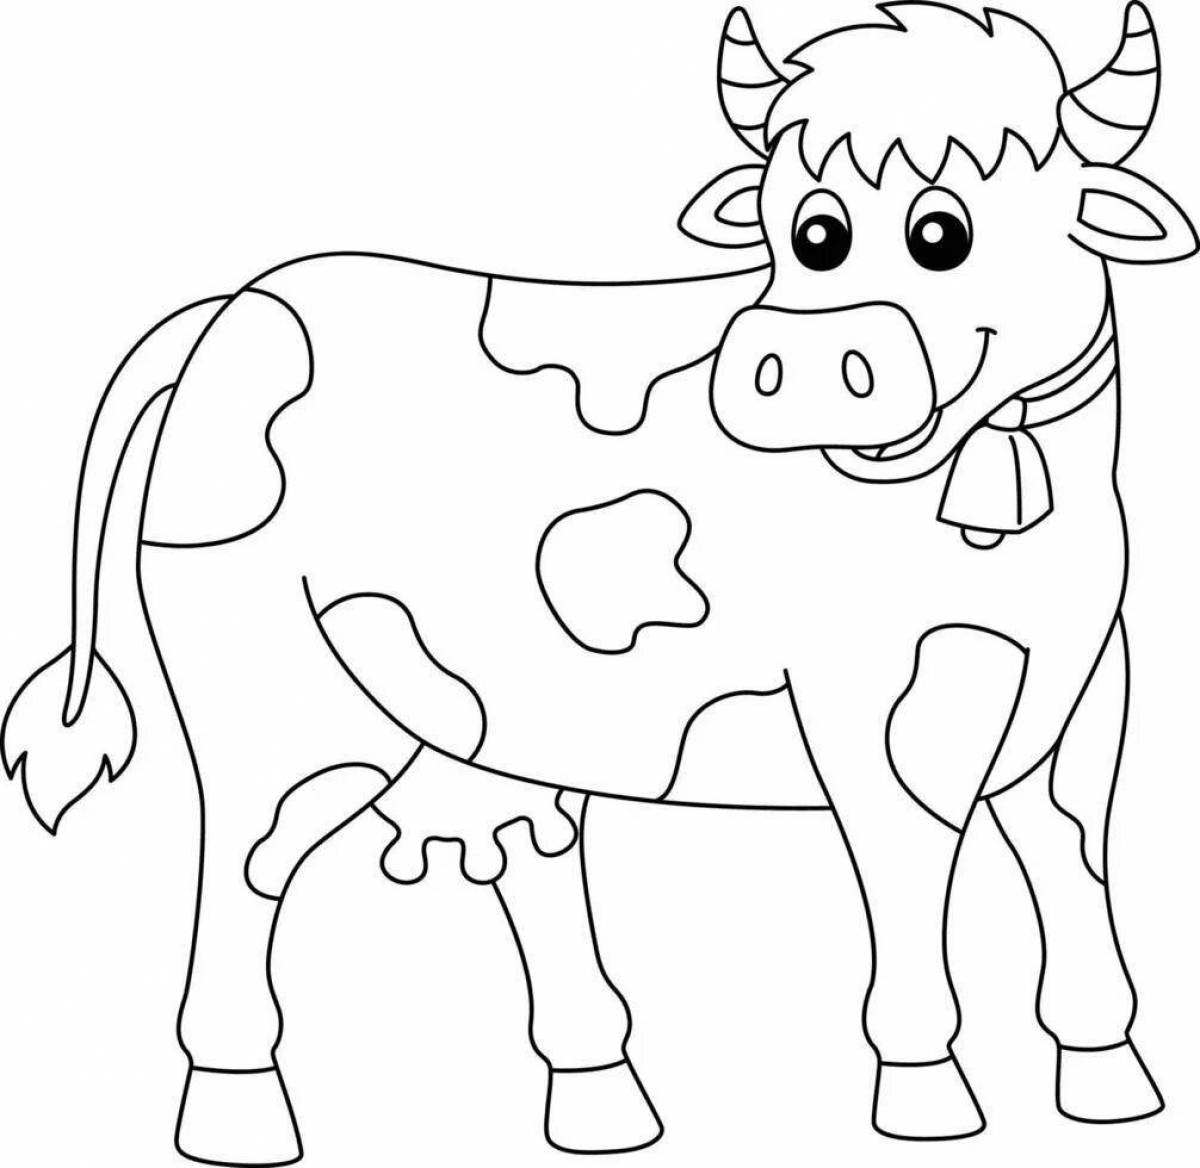 Glowing yellow cow coloring page